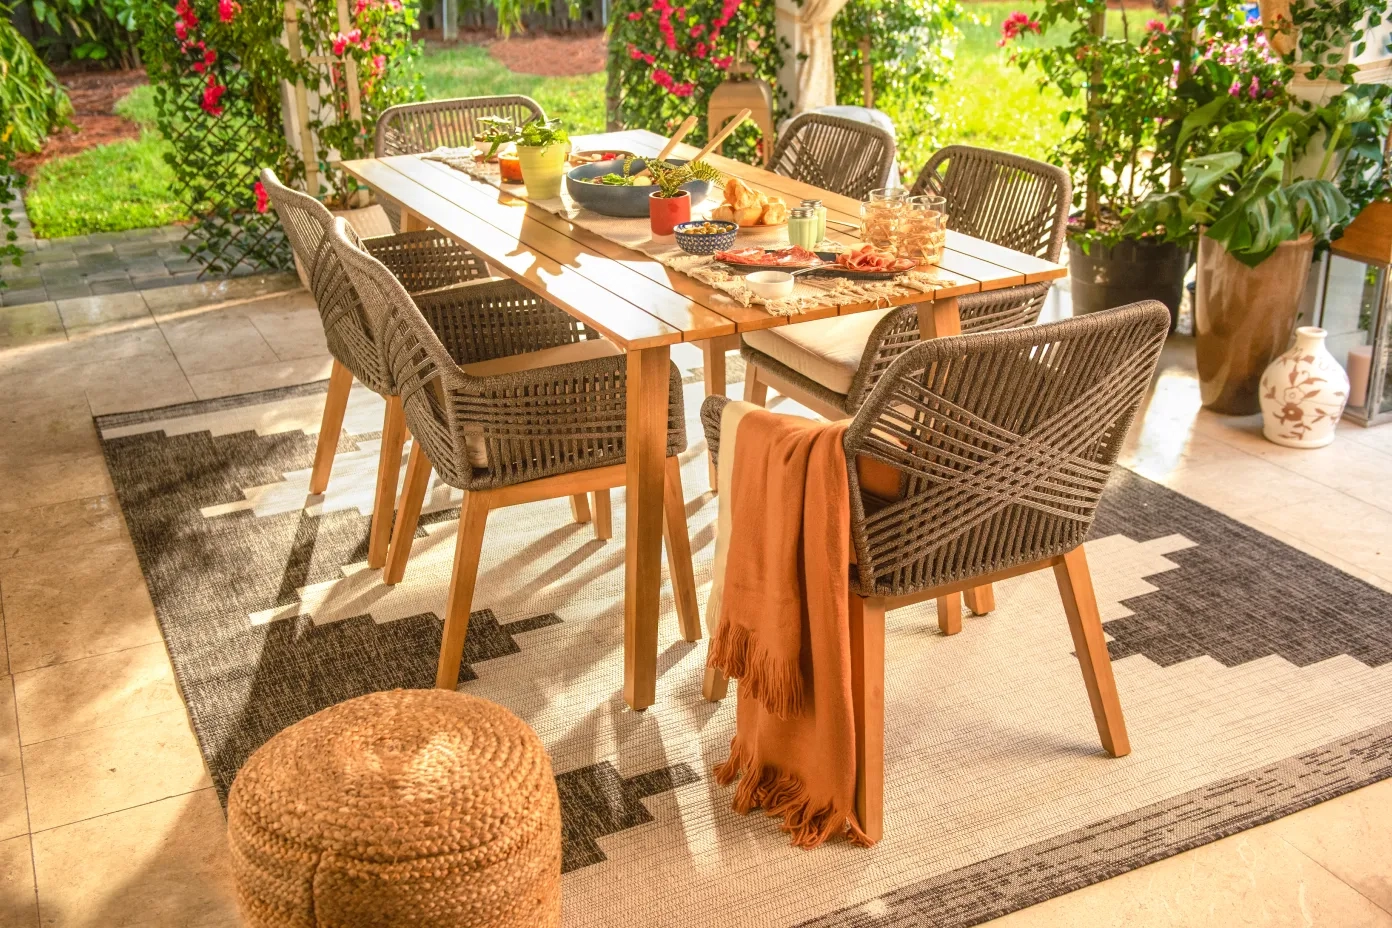 Outdoor Furniture Selection and Care Guide